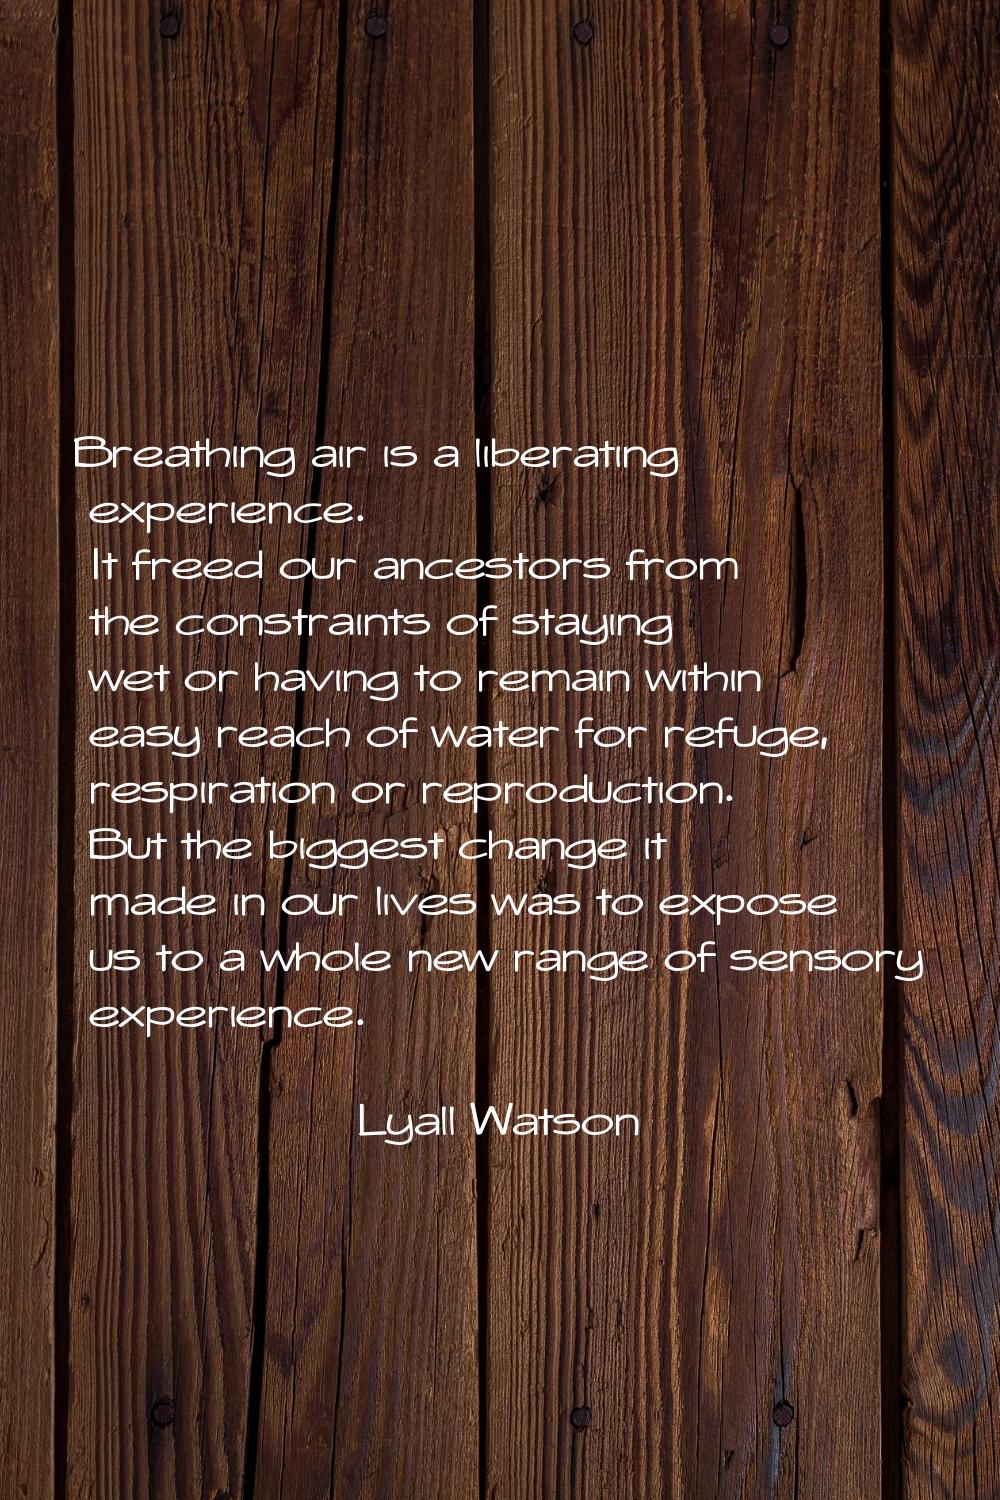 Breathing air is a liberating experience. It freed our ancestors from the constraints of staying we